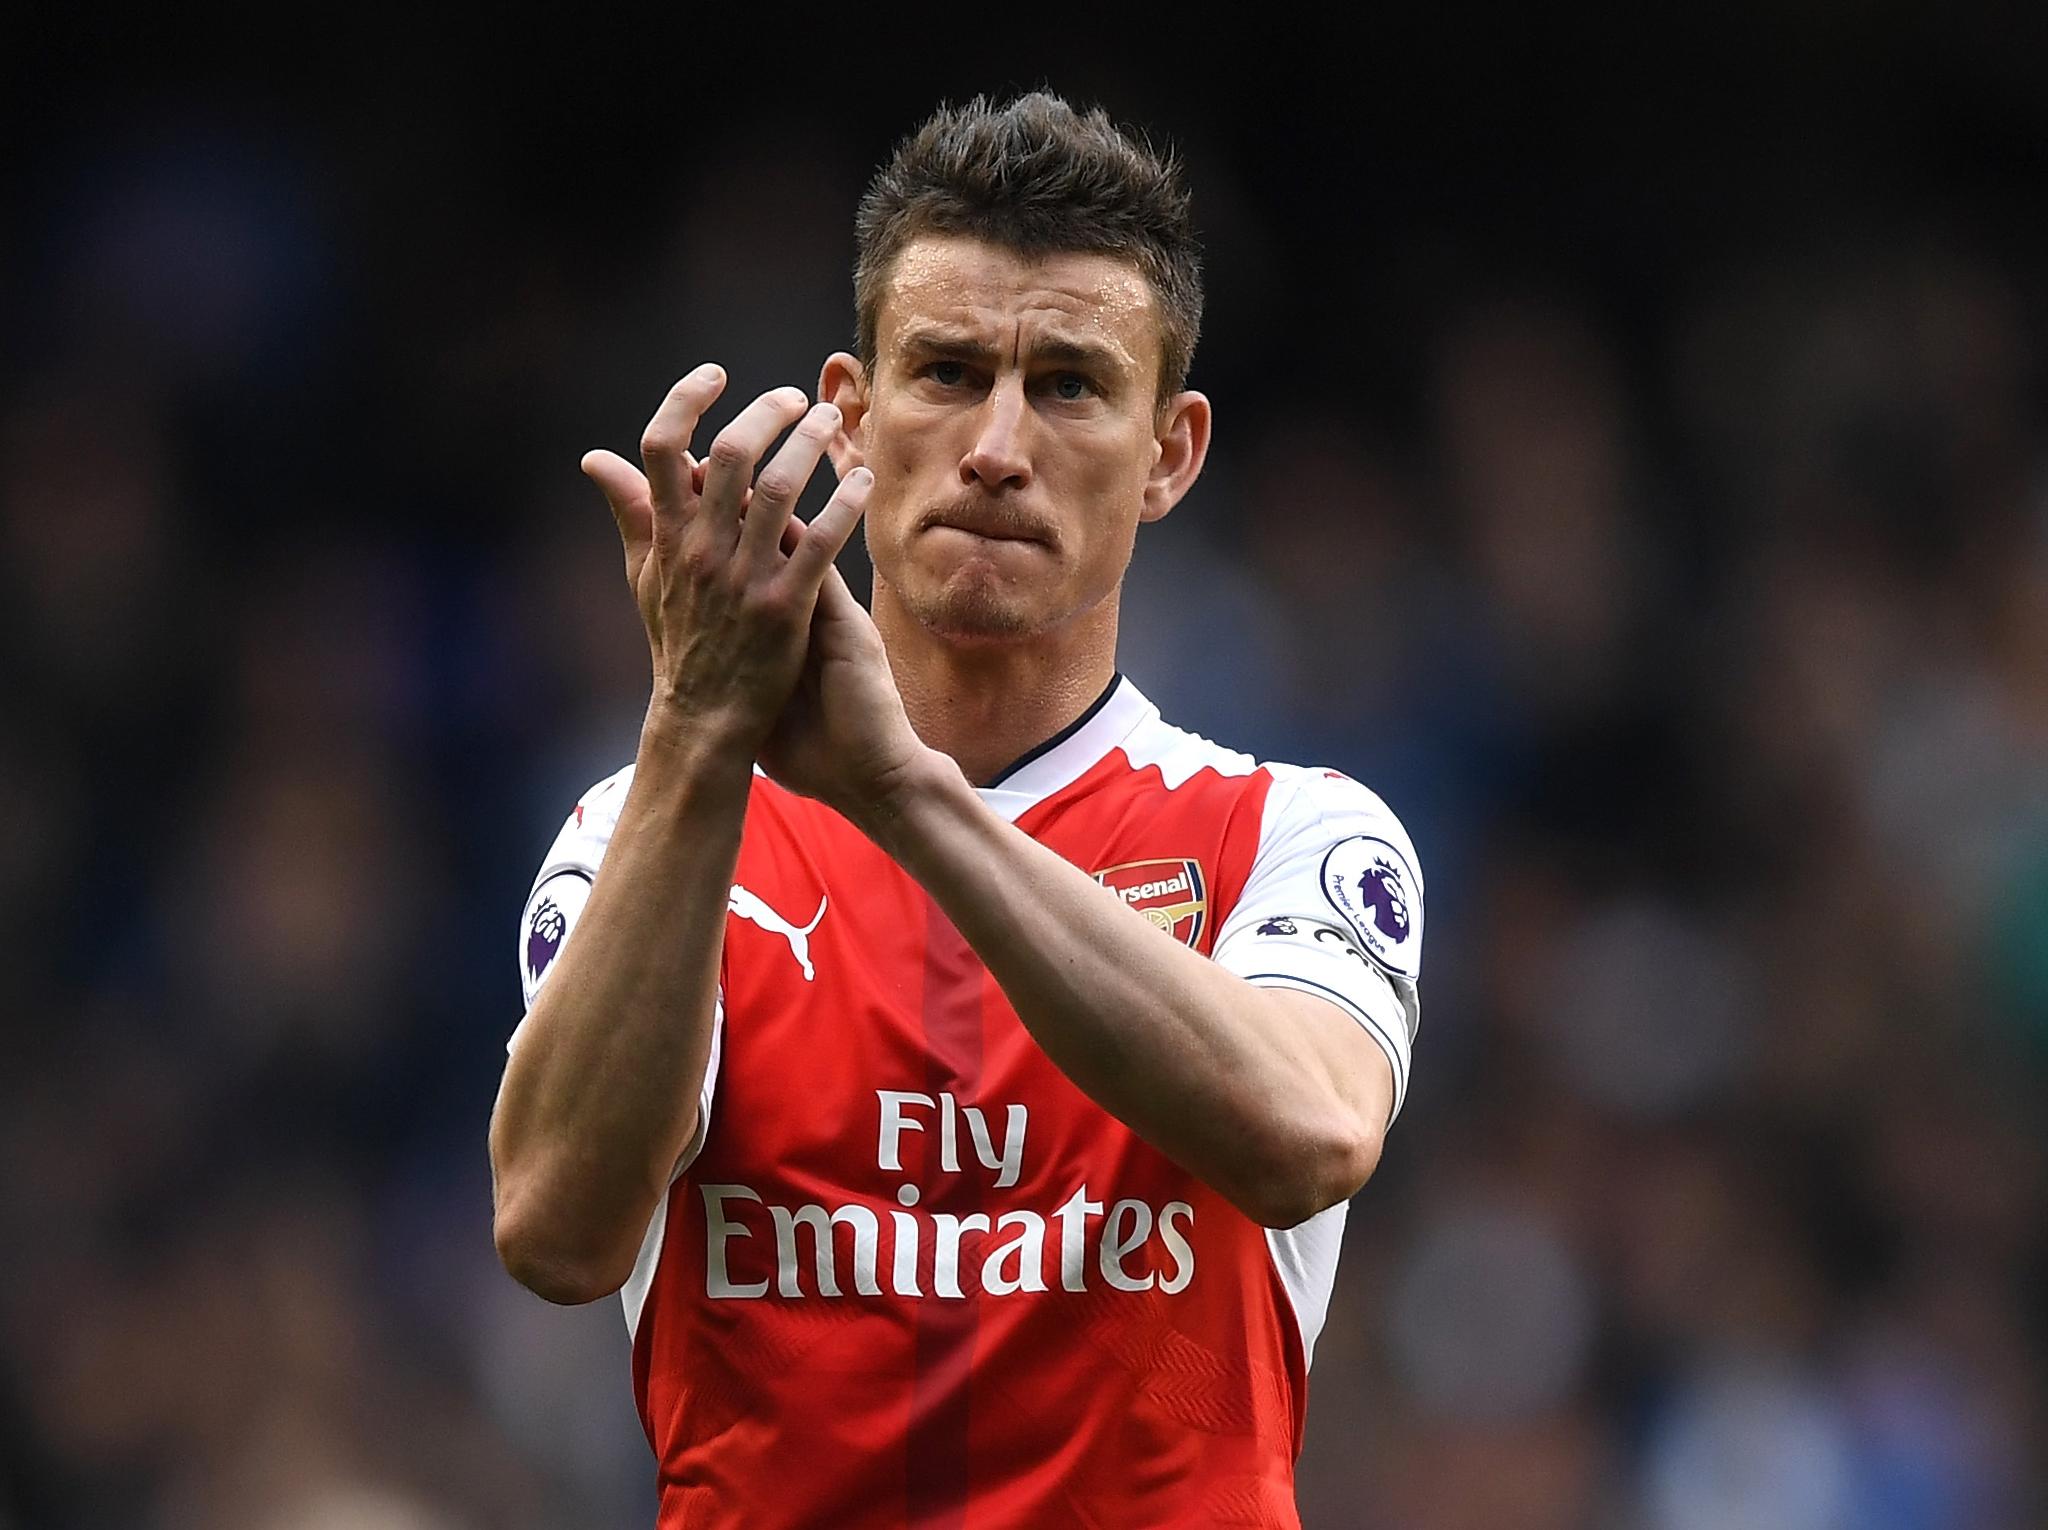 Forget Coutinho or Sanchez, Koscielny is the most important returnee at Anfield this weekend